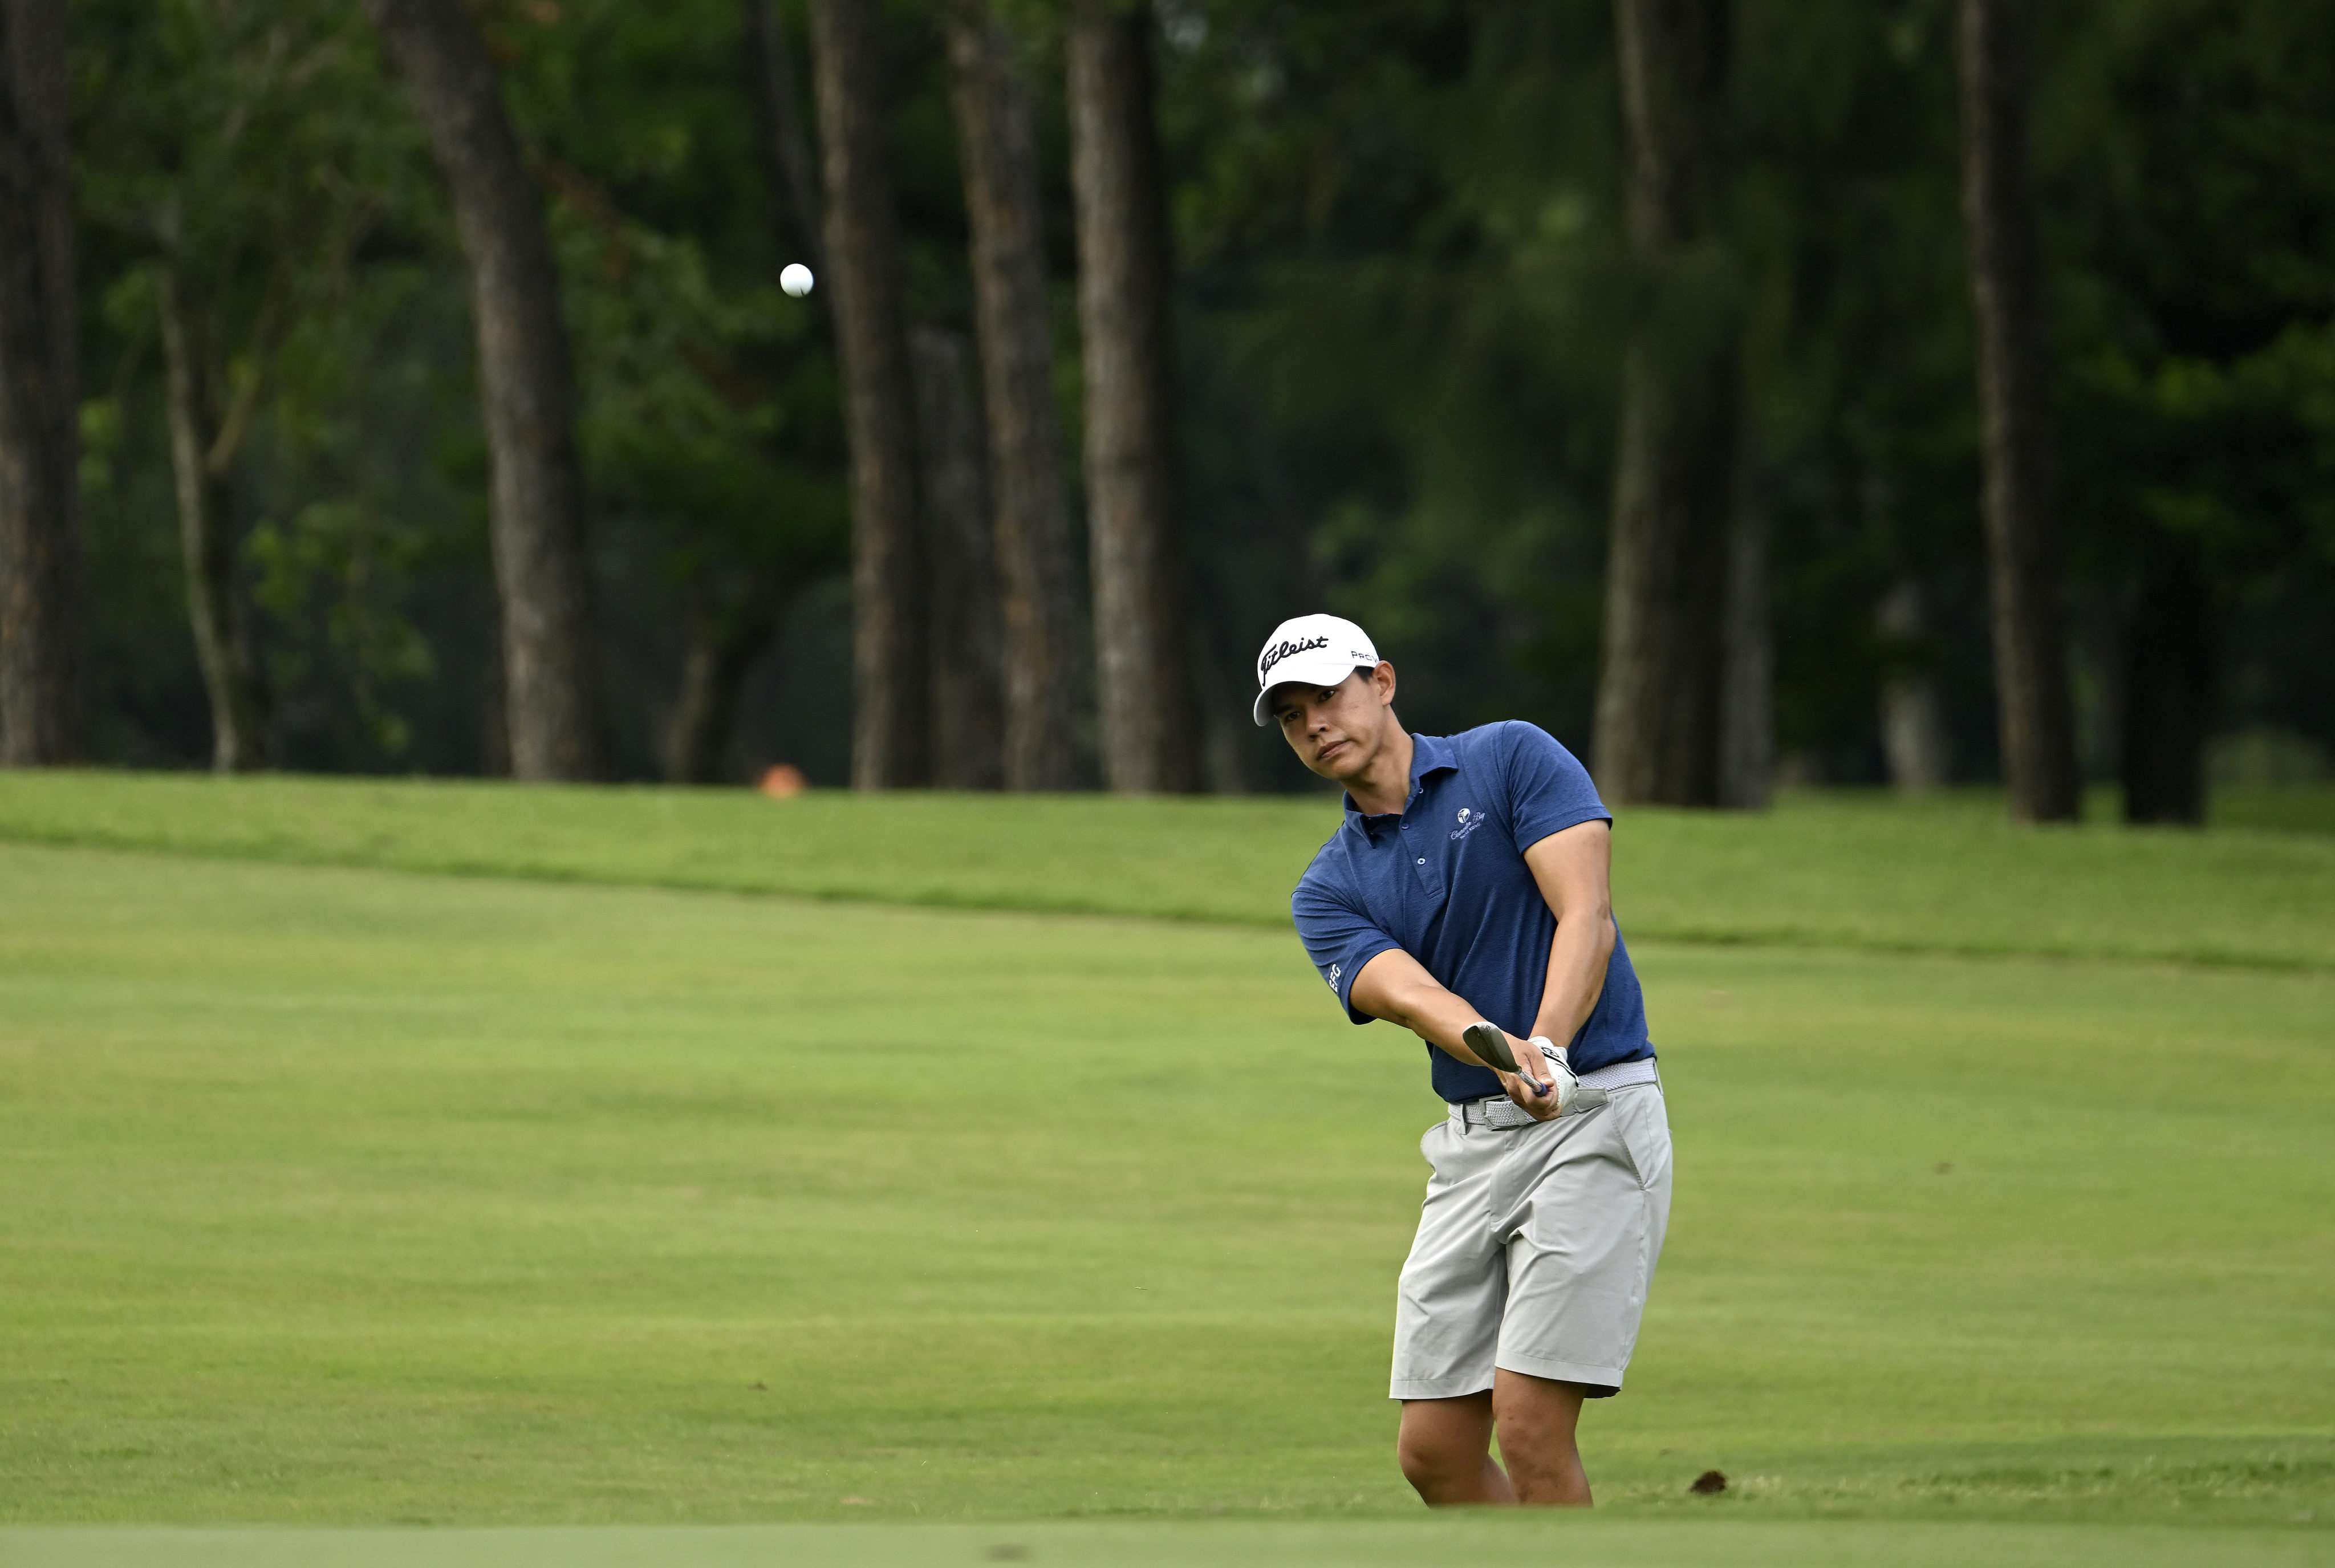 Hong Kong’s Matthew Cheung chipped in for birdie at the last during his opening round of 65 in the Yeangder TPC. Photo: Asian Tour.